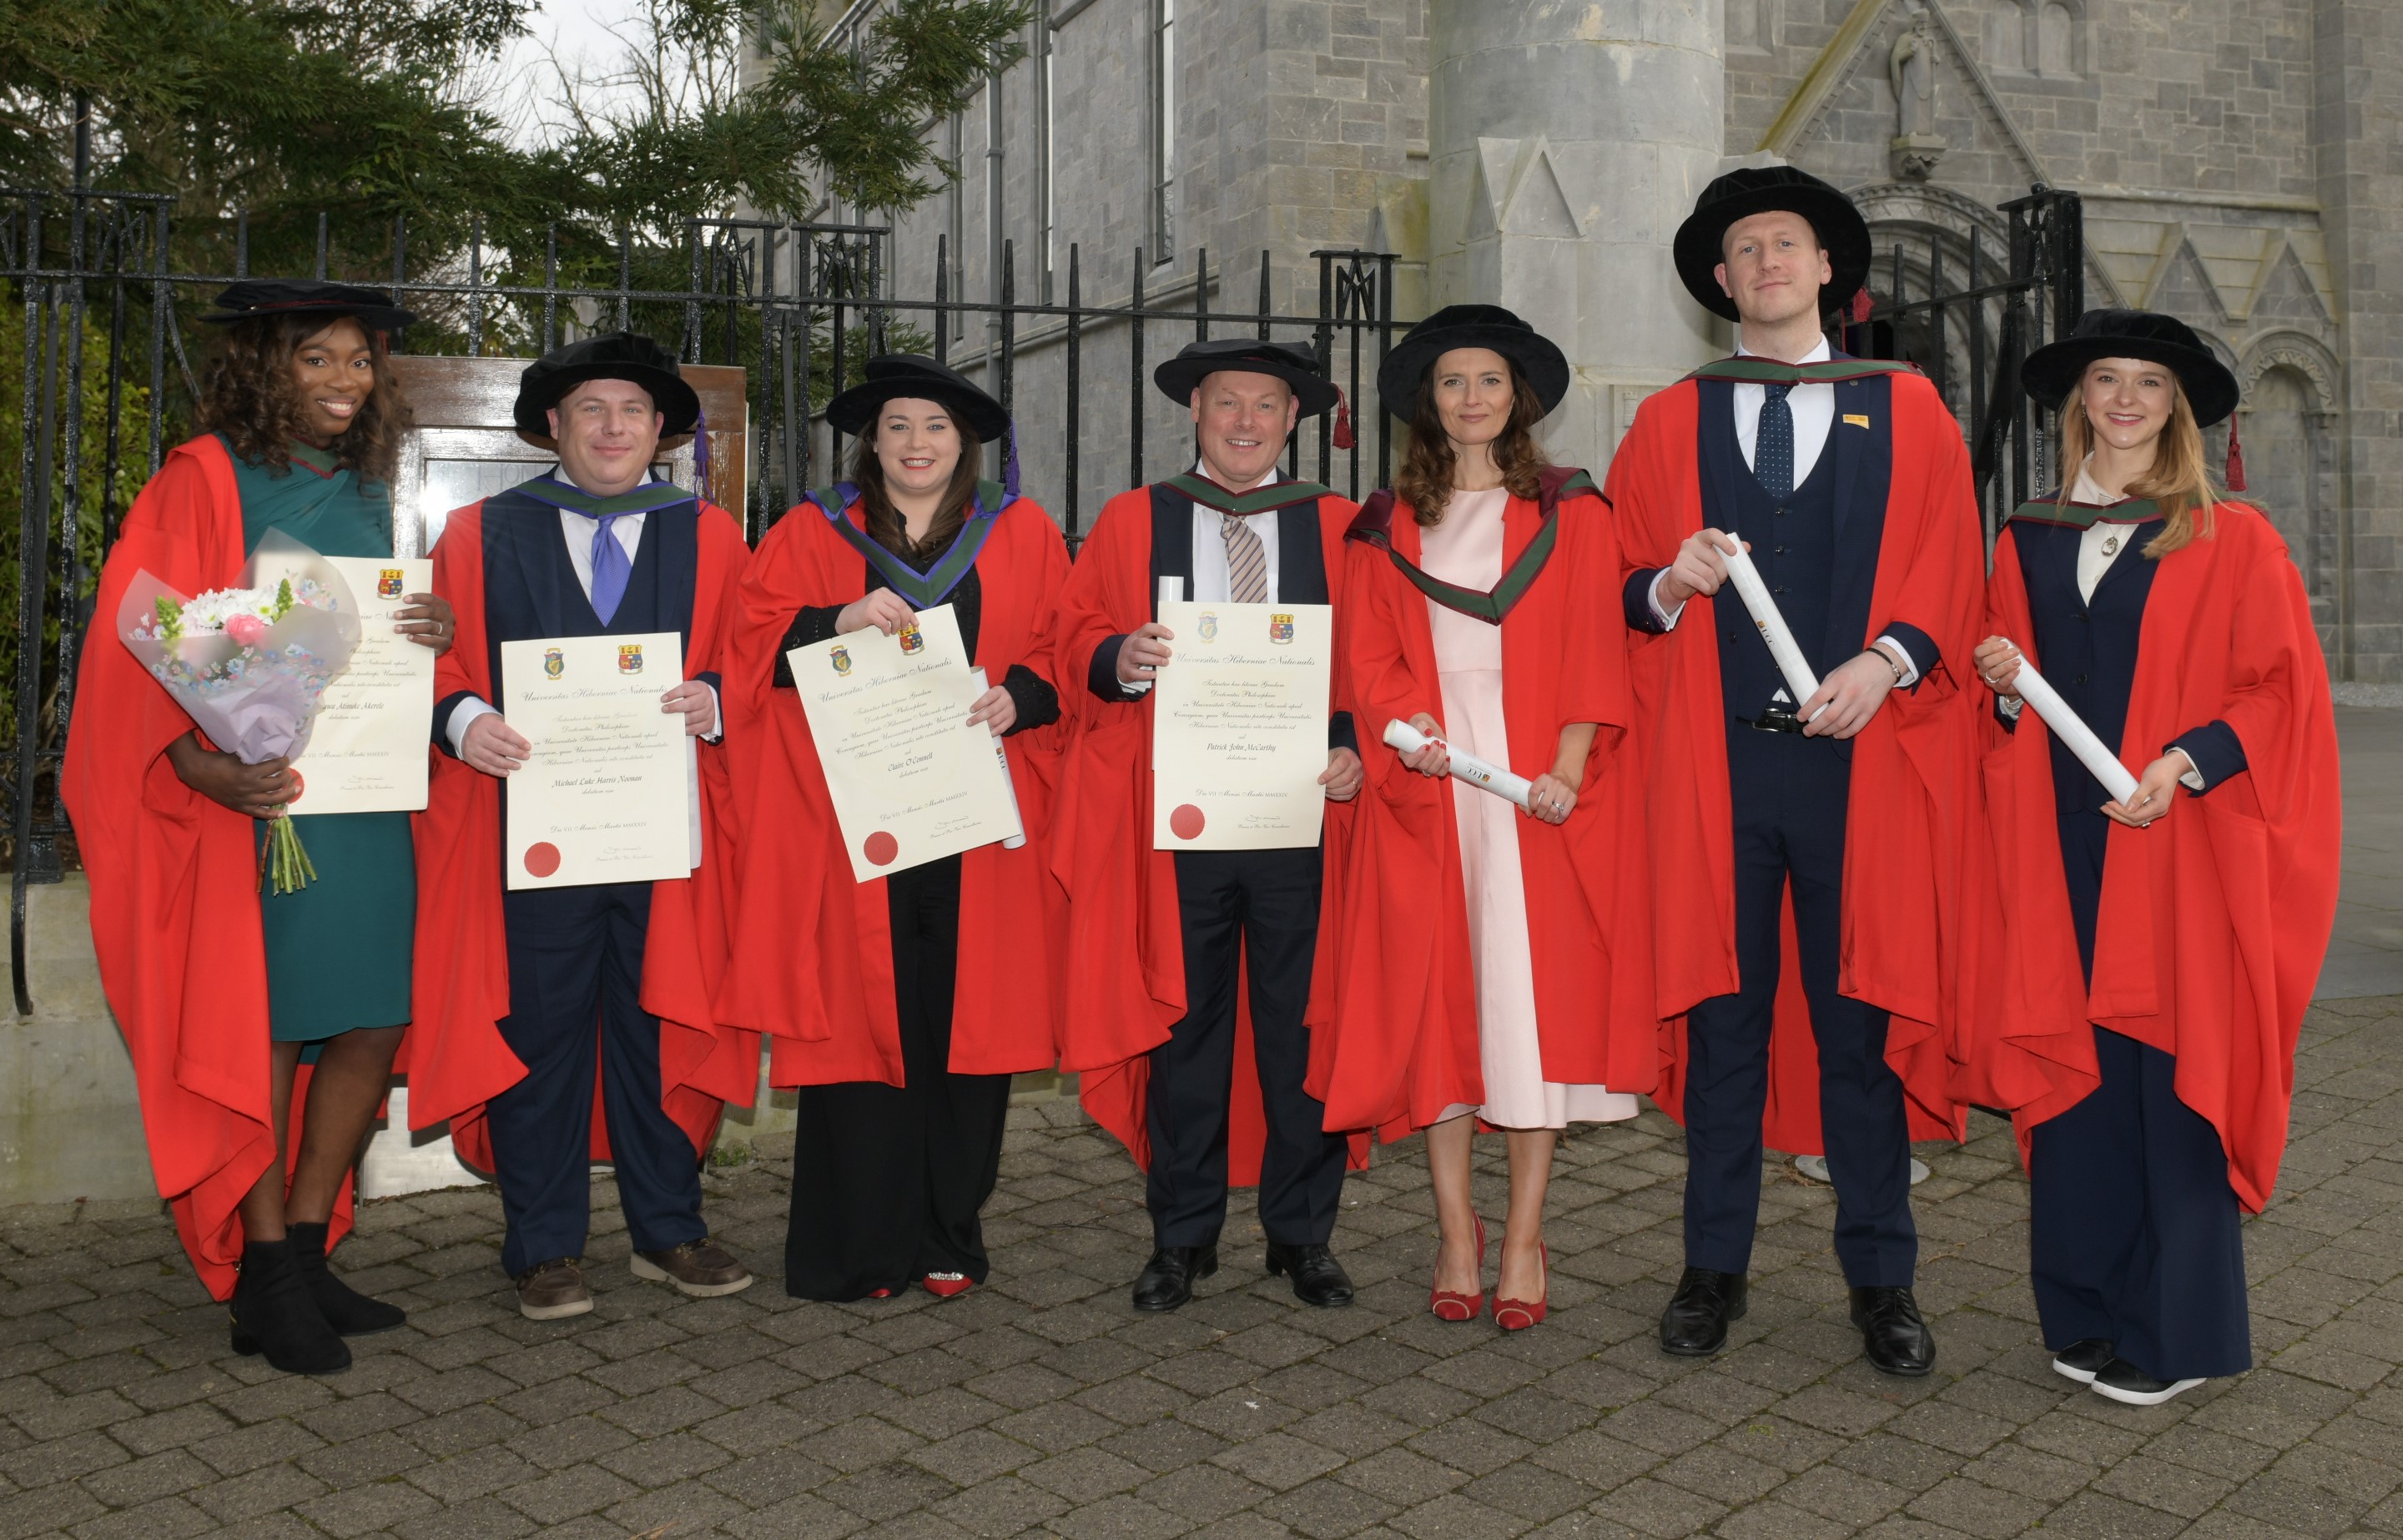 Newly conferred PhD graduates of the College of Business and Law (l-r)
Dr Iretioluwa Atinuke Akerele, Dr Michael Luke Harris Noonan, Dr Claire O'Connell, Dr Patrick John McCarthy, Dr Emer Anne McGeown, Dr Darragh O'Leary, Dr Julia Le Maitre